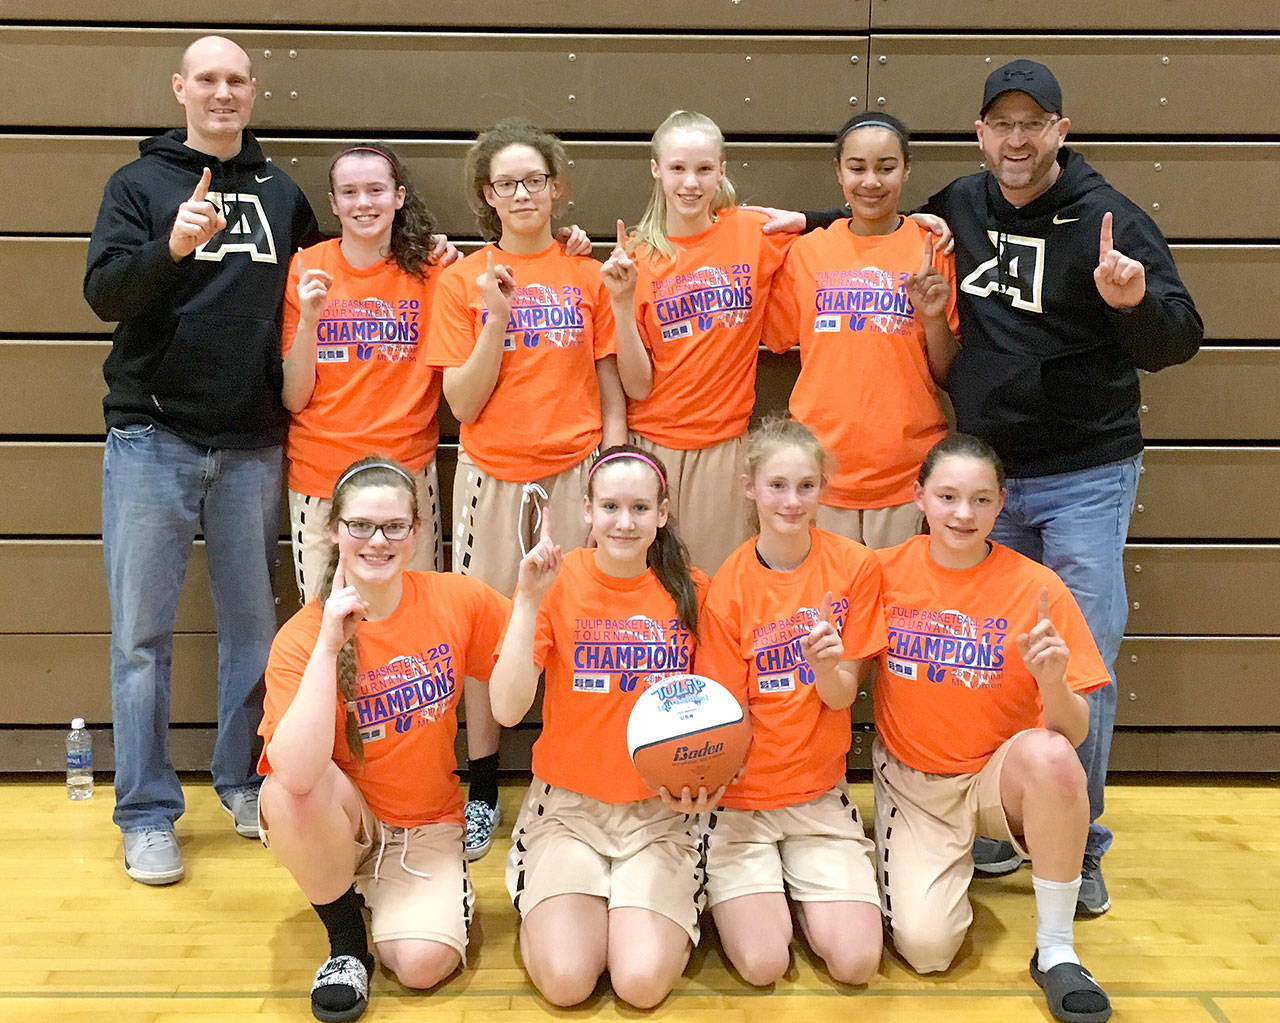 The Olympic Avalanche Black eighth-grade girls won the 25th annual Tulip Tournament this weekend. From left, back row, are assistant coach Kenton Long, Jaida Wood, MJ Cooke, Maggie Ruddell, Jayla Julmist and head coach Joe Marvelle. From left, front row, are Myra Gale Walker, Hannah Reetz, Emilia Long, Jada Cargo-Acosta.